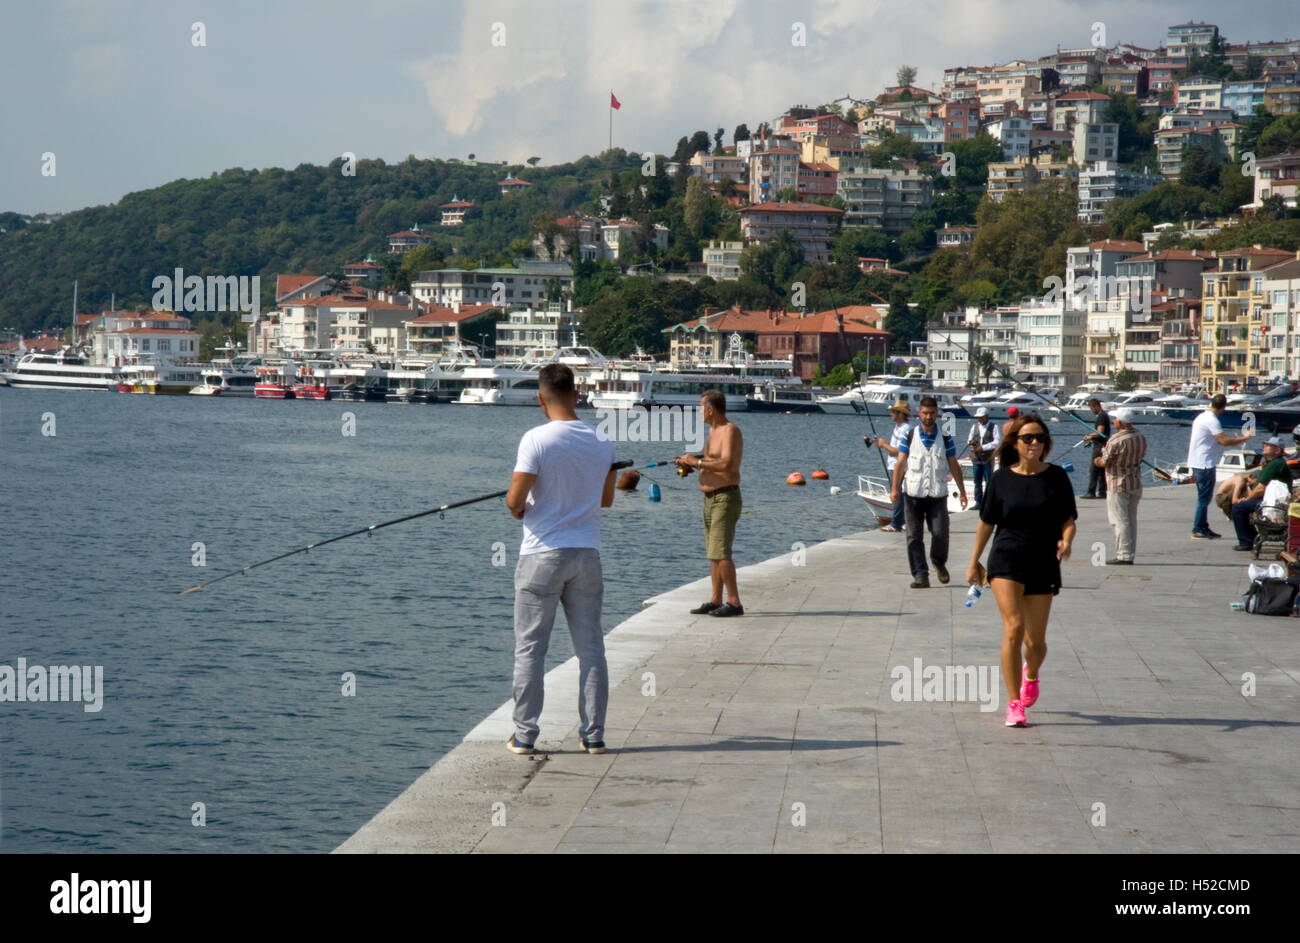 Fishermen and strollers along the banks of the Bosporus Sea ea in Istanbul, Turkey Stock Photo